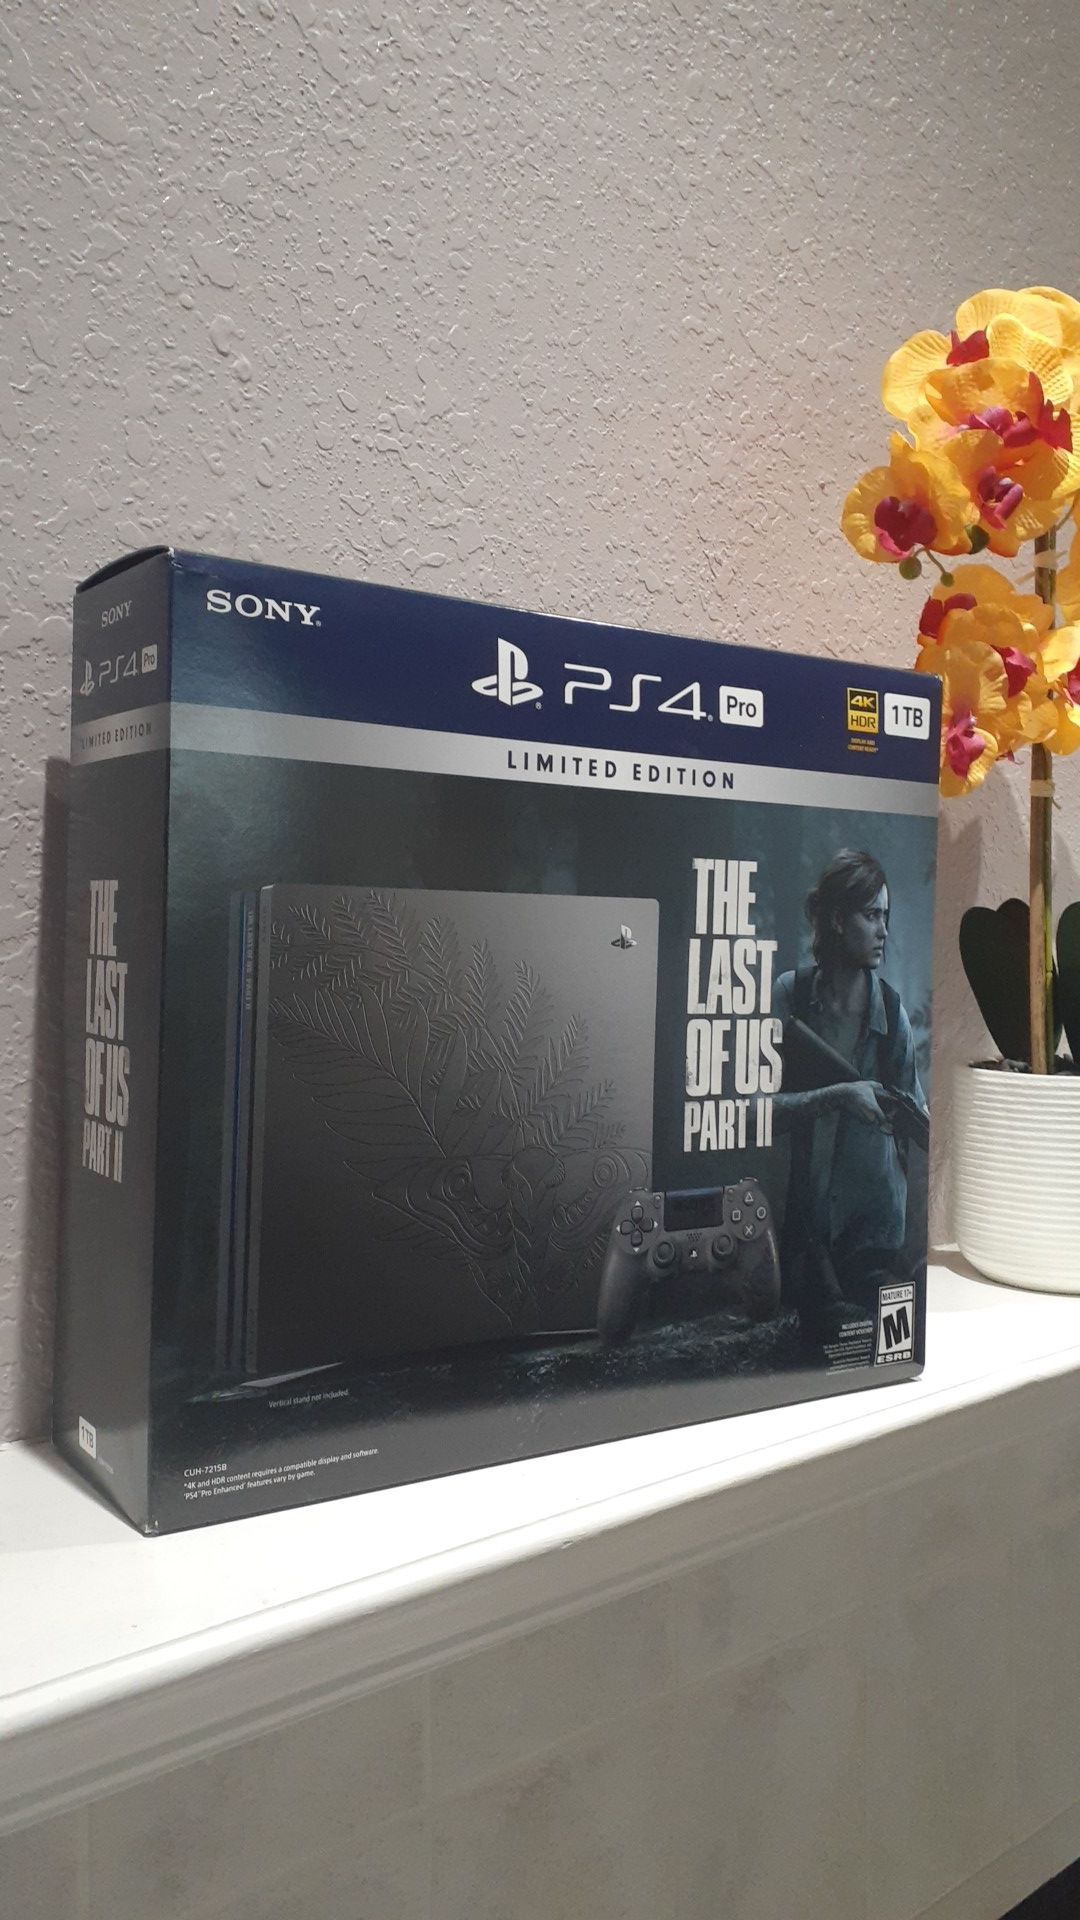 Ps4 pro last of us 2 limited edition bundle sold out